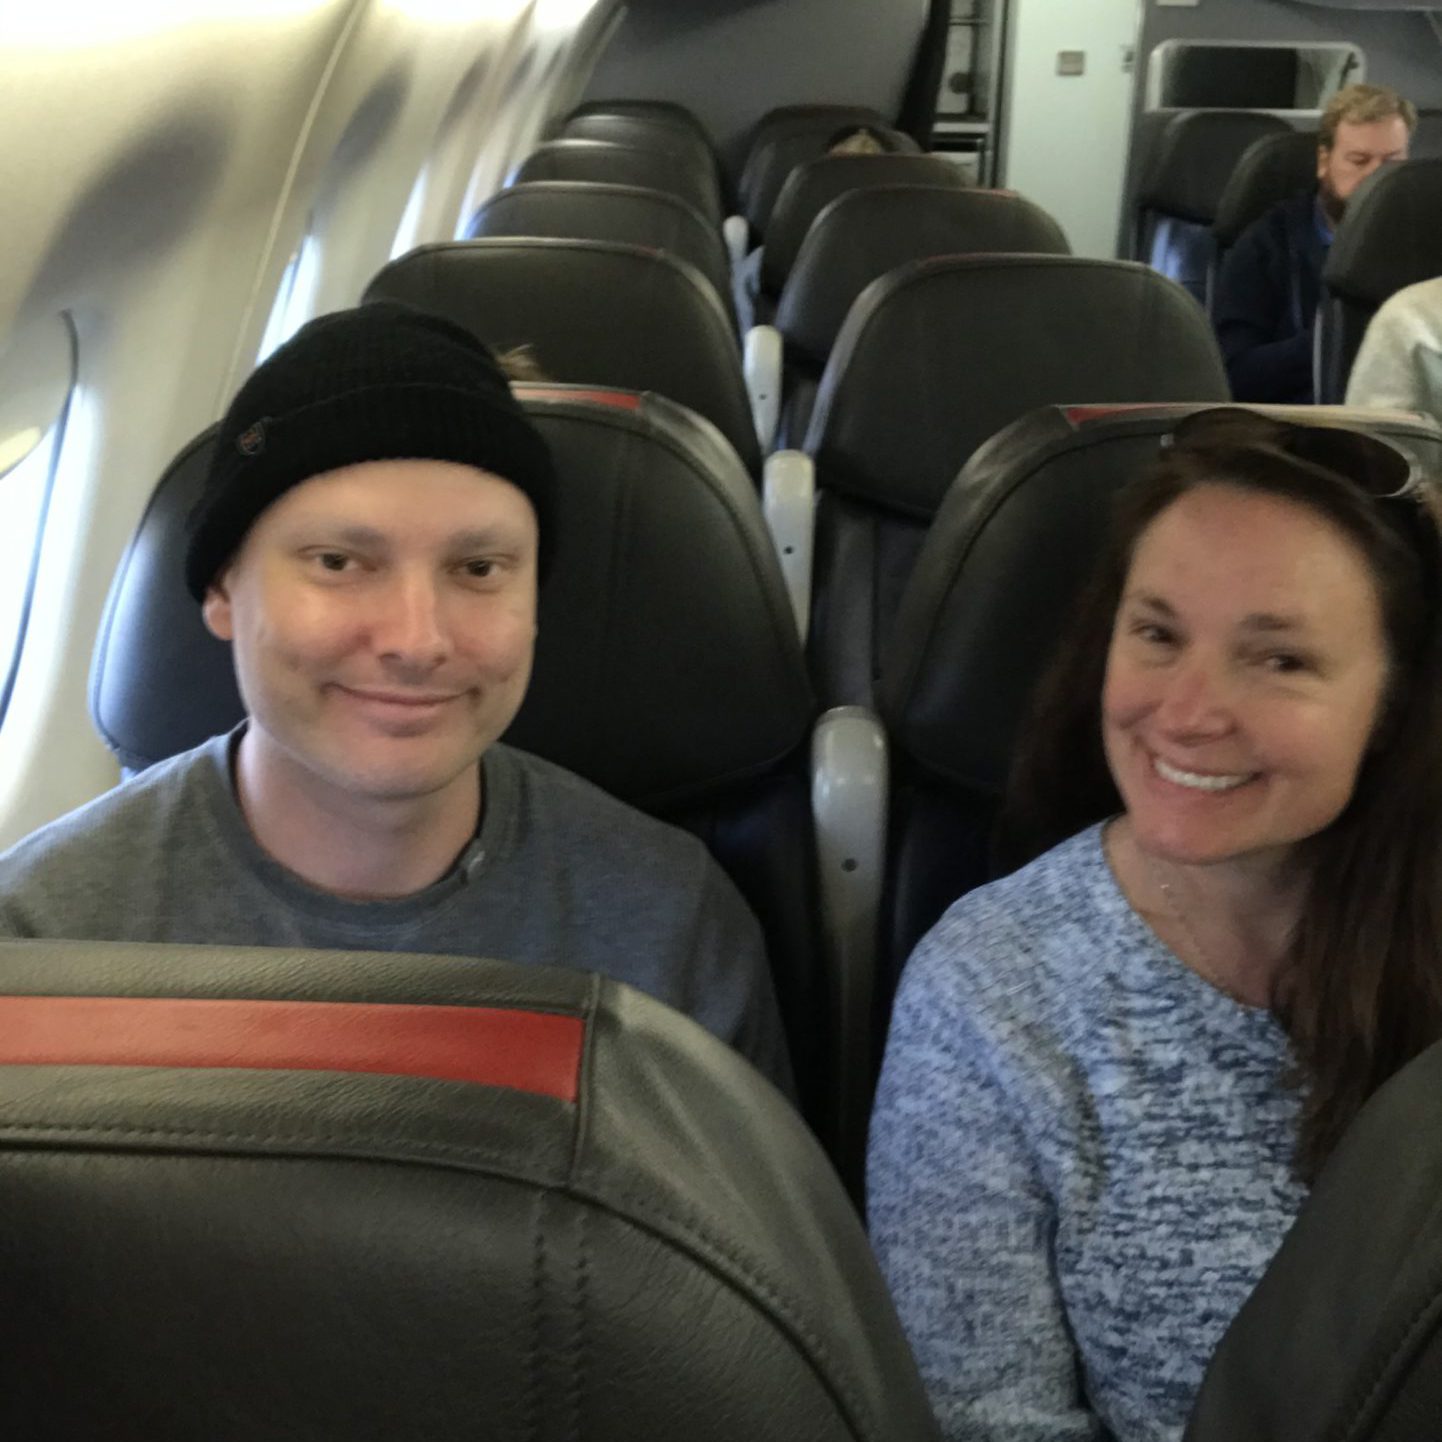 Steven and his mom on a plane to Indiana